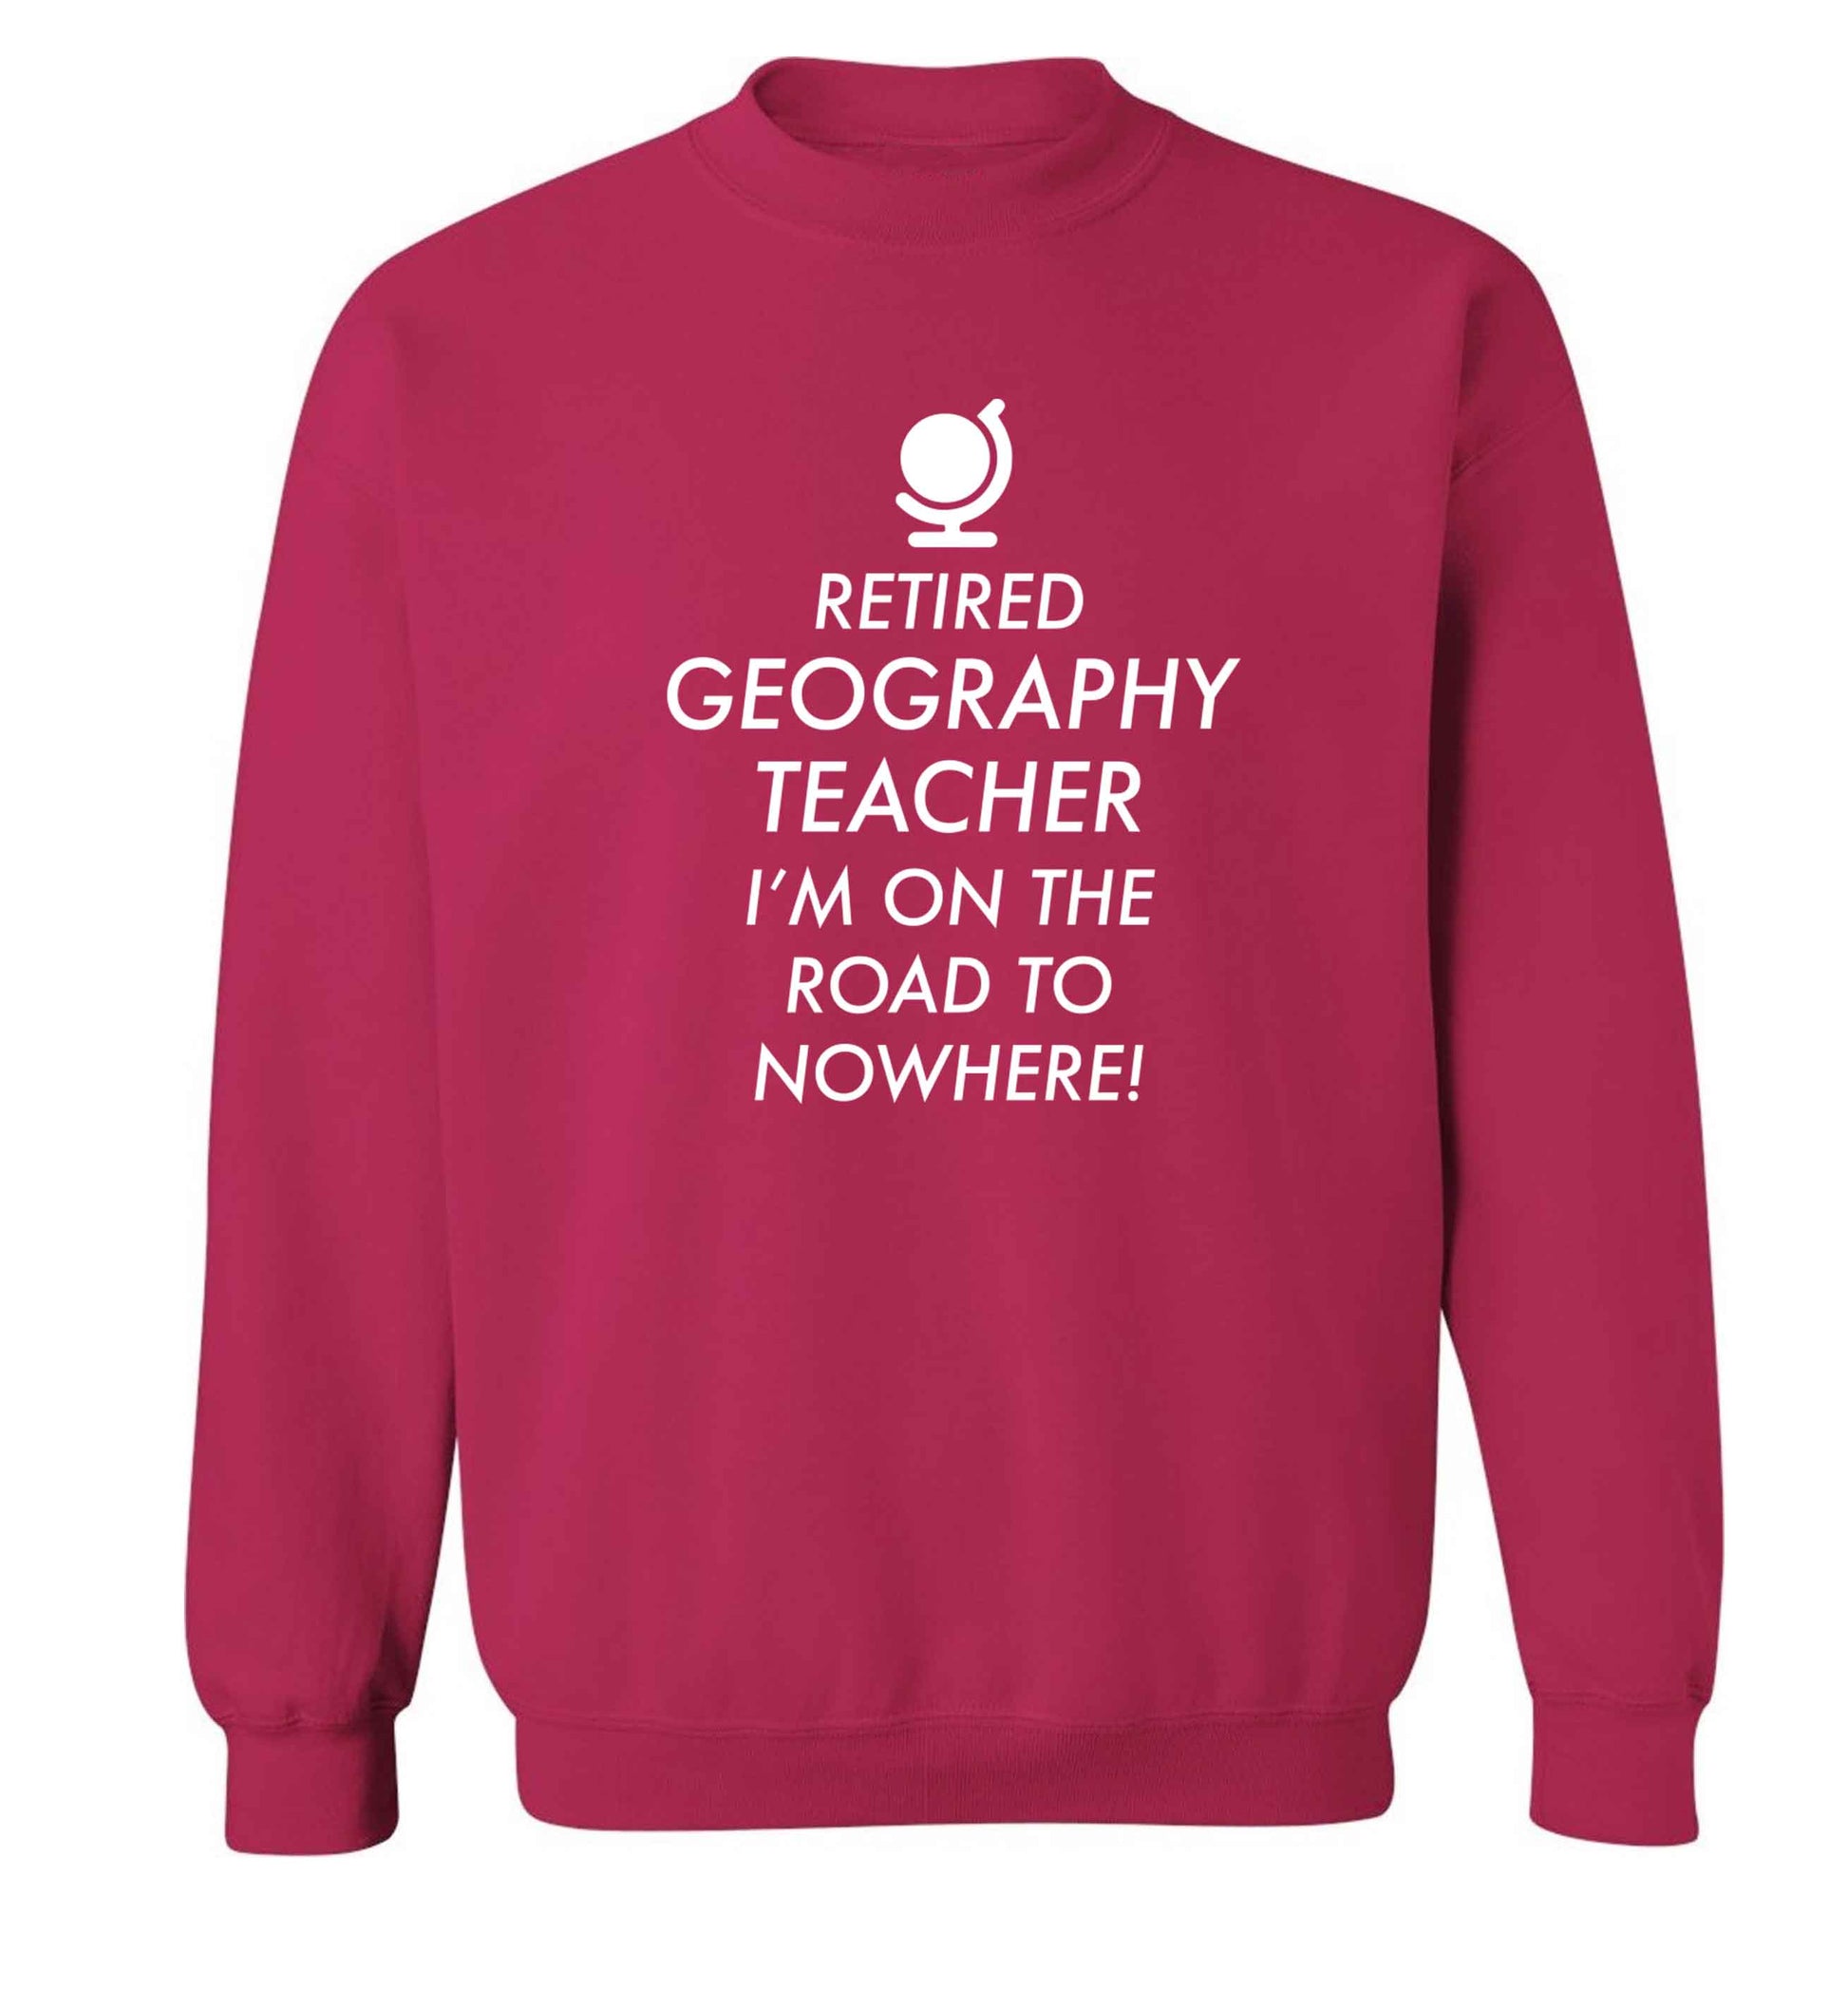 Retired geography teacher I'm on the road to nowhere Adult's unisex pink Sweater 2XL